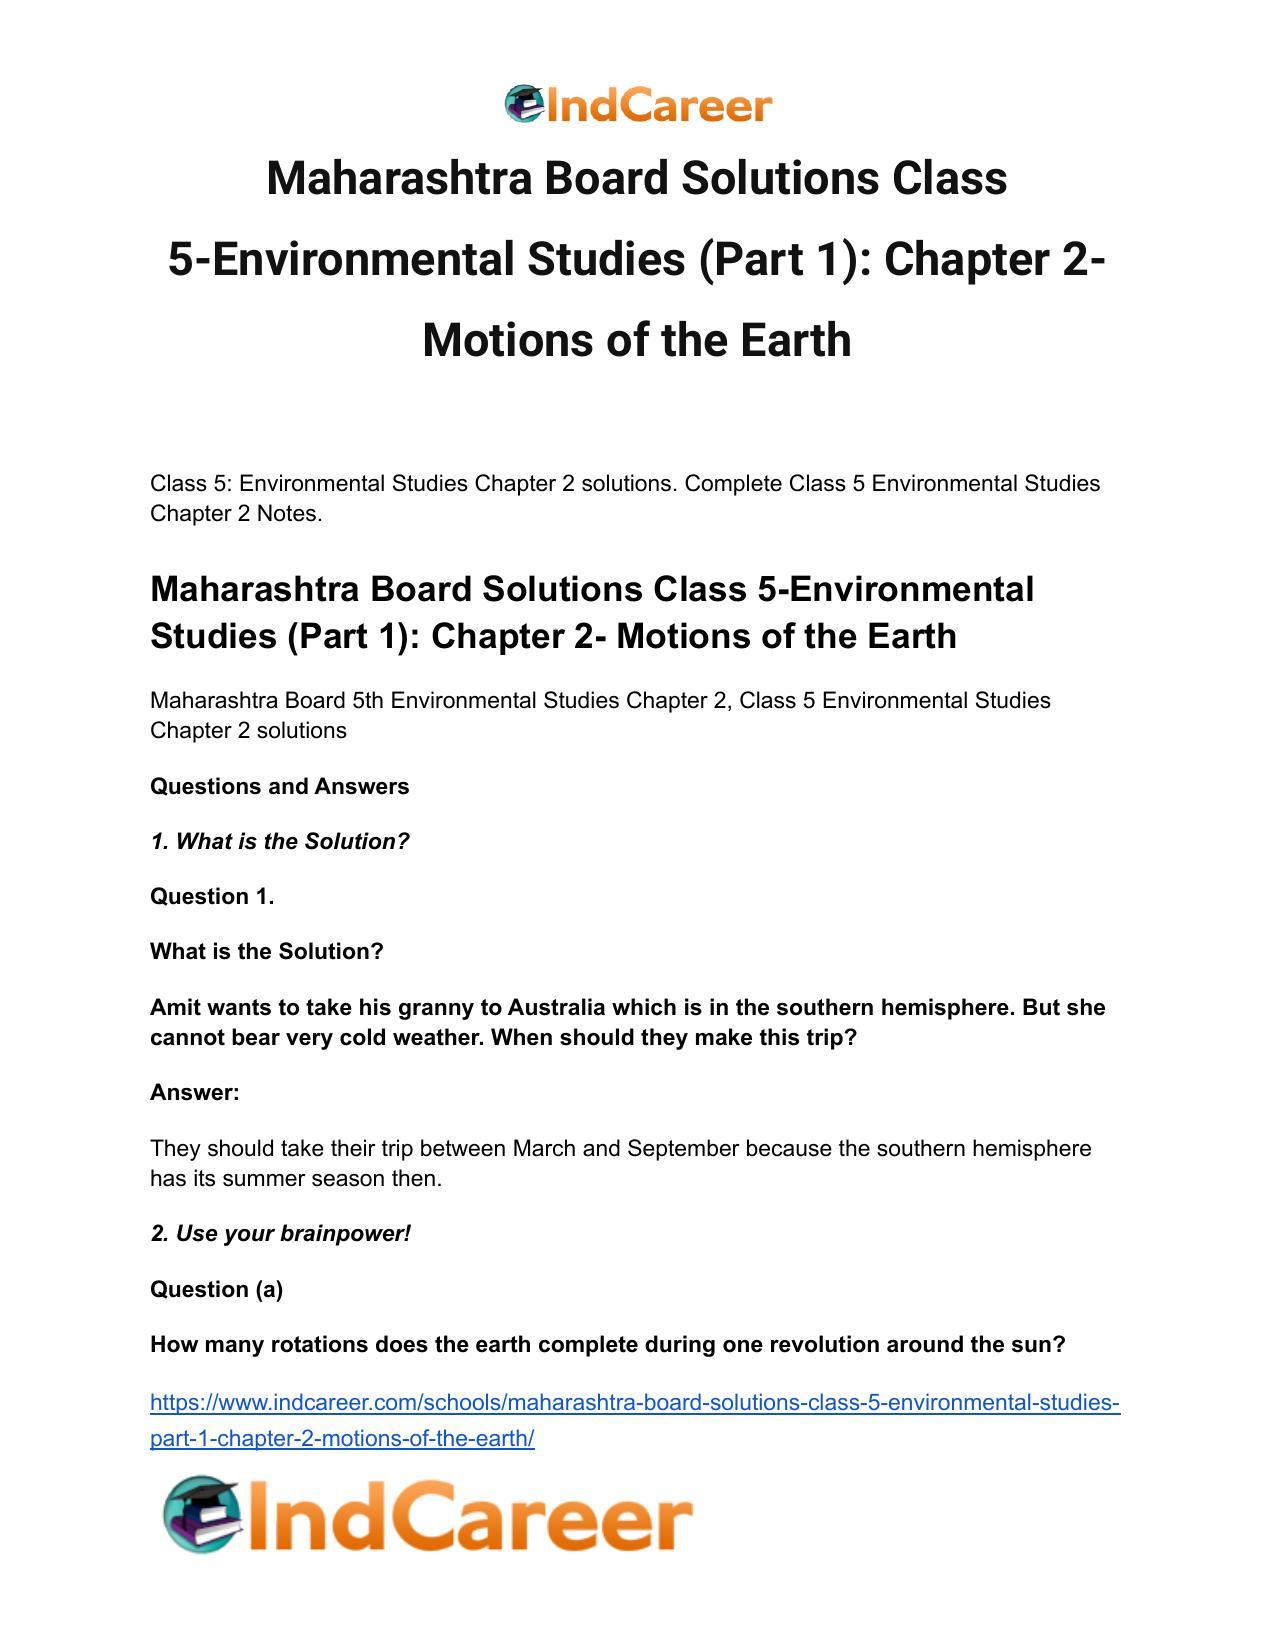 Maharashtra Board Solutions Class 5-Environmental Studies (Part 1): Chapter 2- Motions of the Earth - Page 2